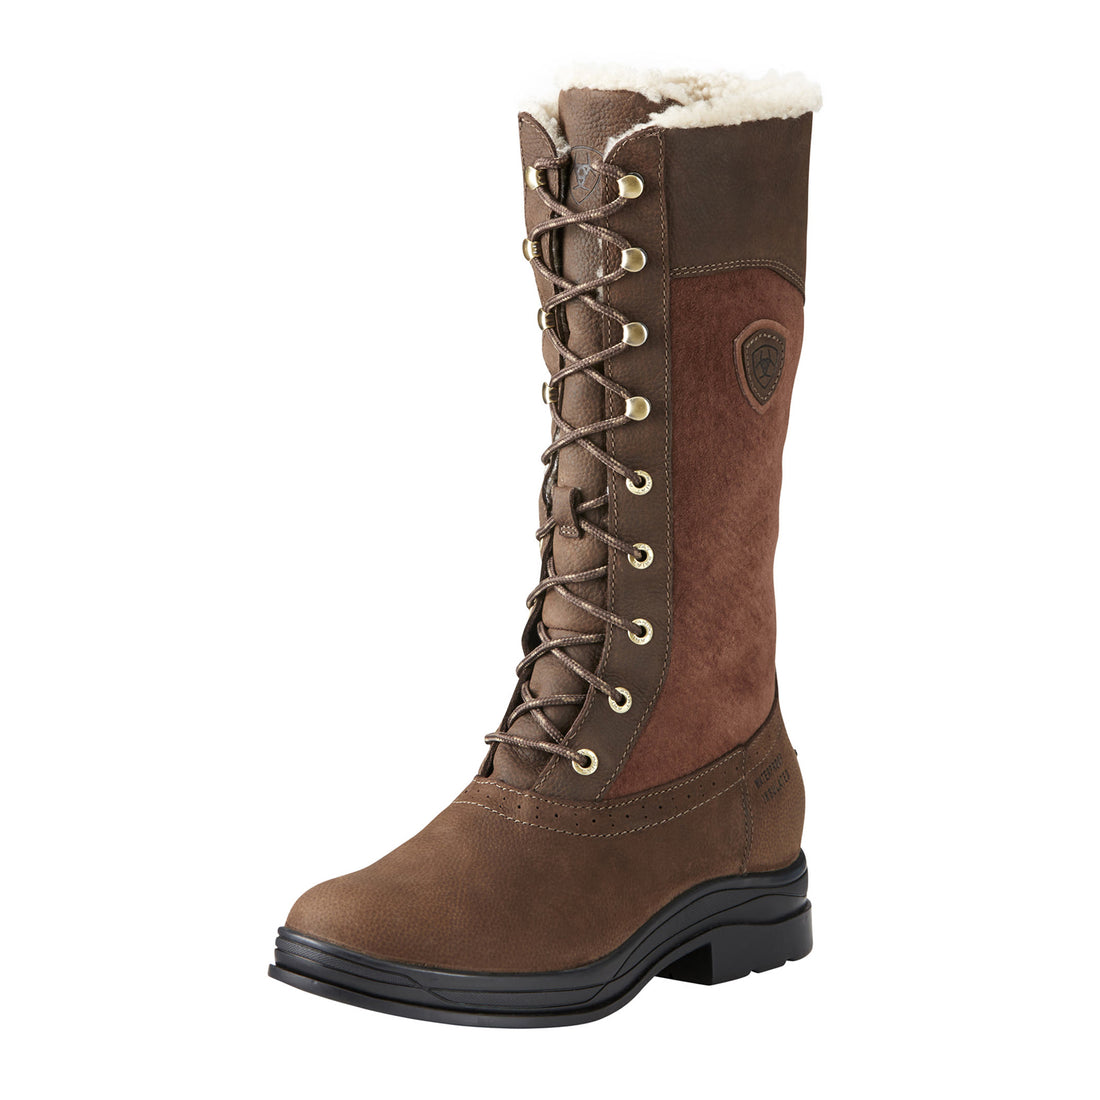 Ariat-Wythburn-Waterproof-Insulated-Boots